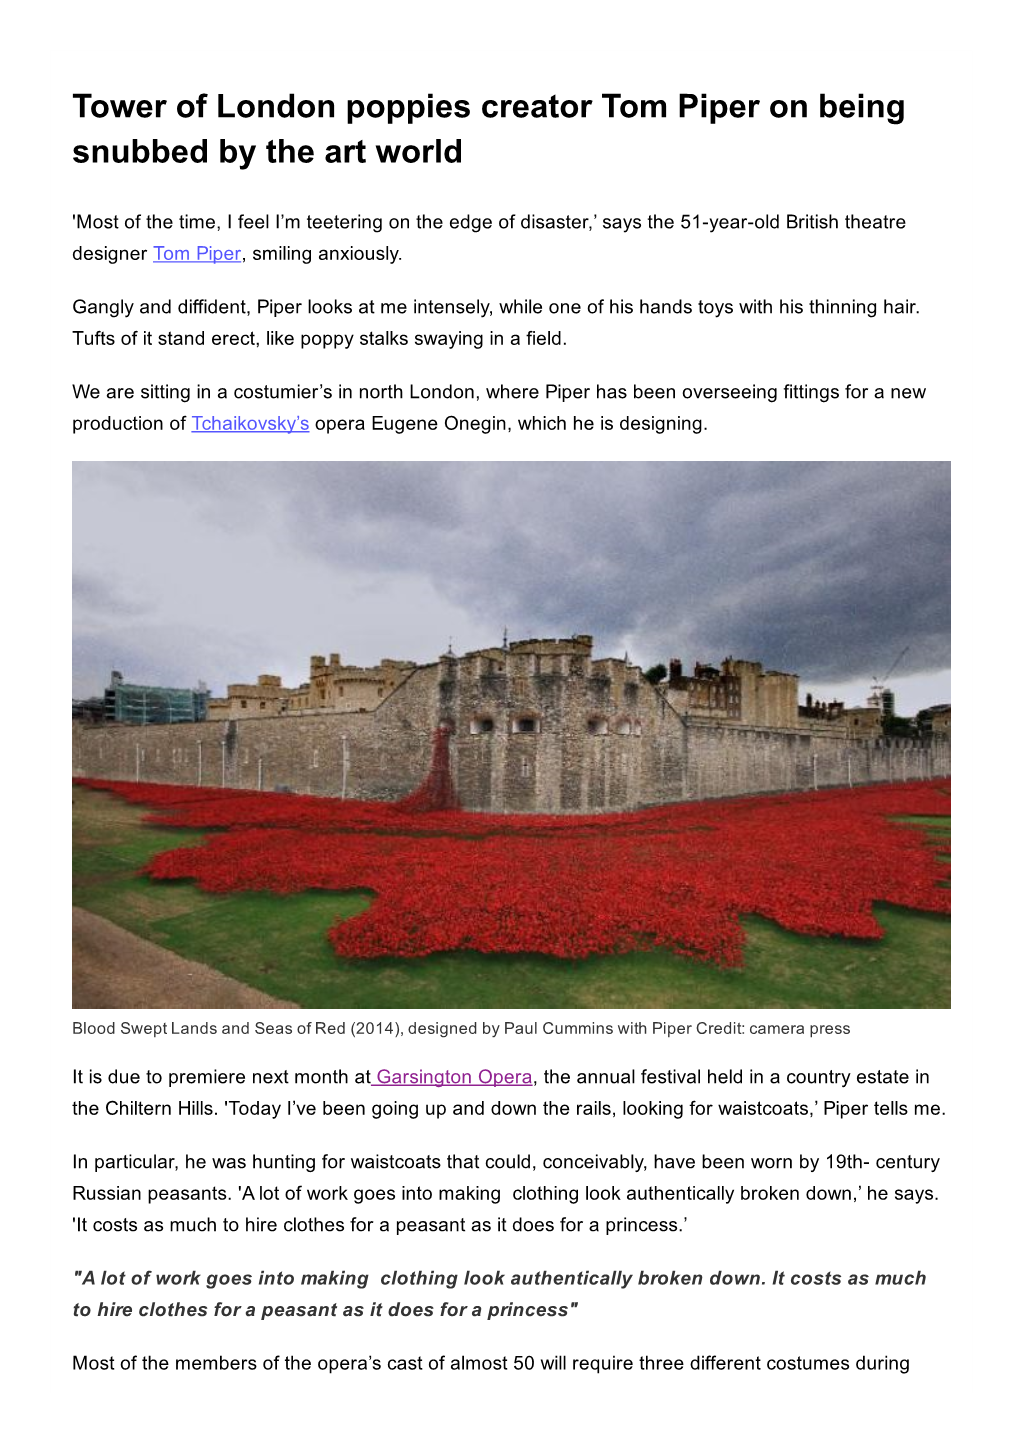 Tower of London Poppies Creator Tom Piper on Being Snubbed by the Art World